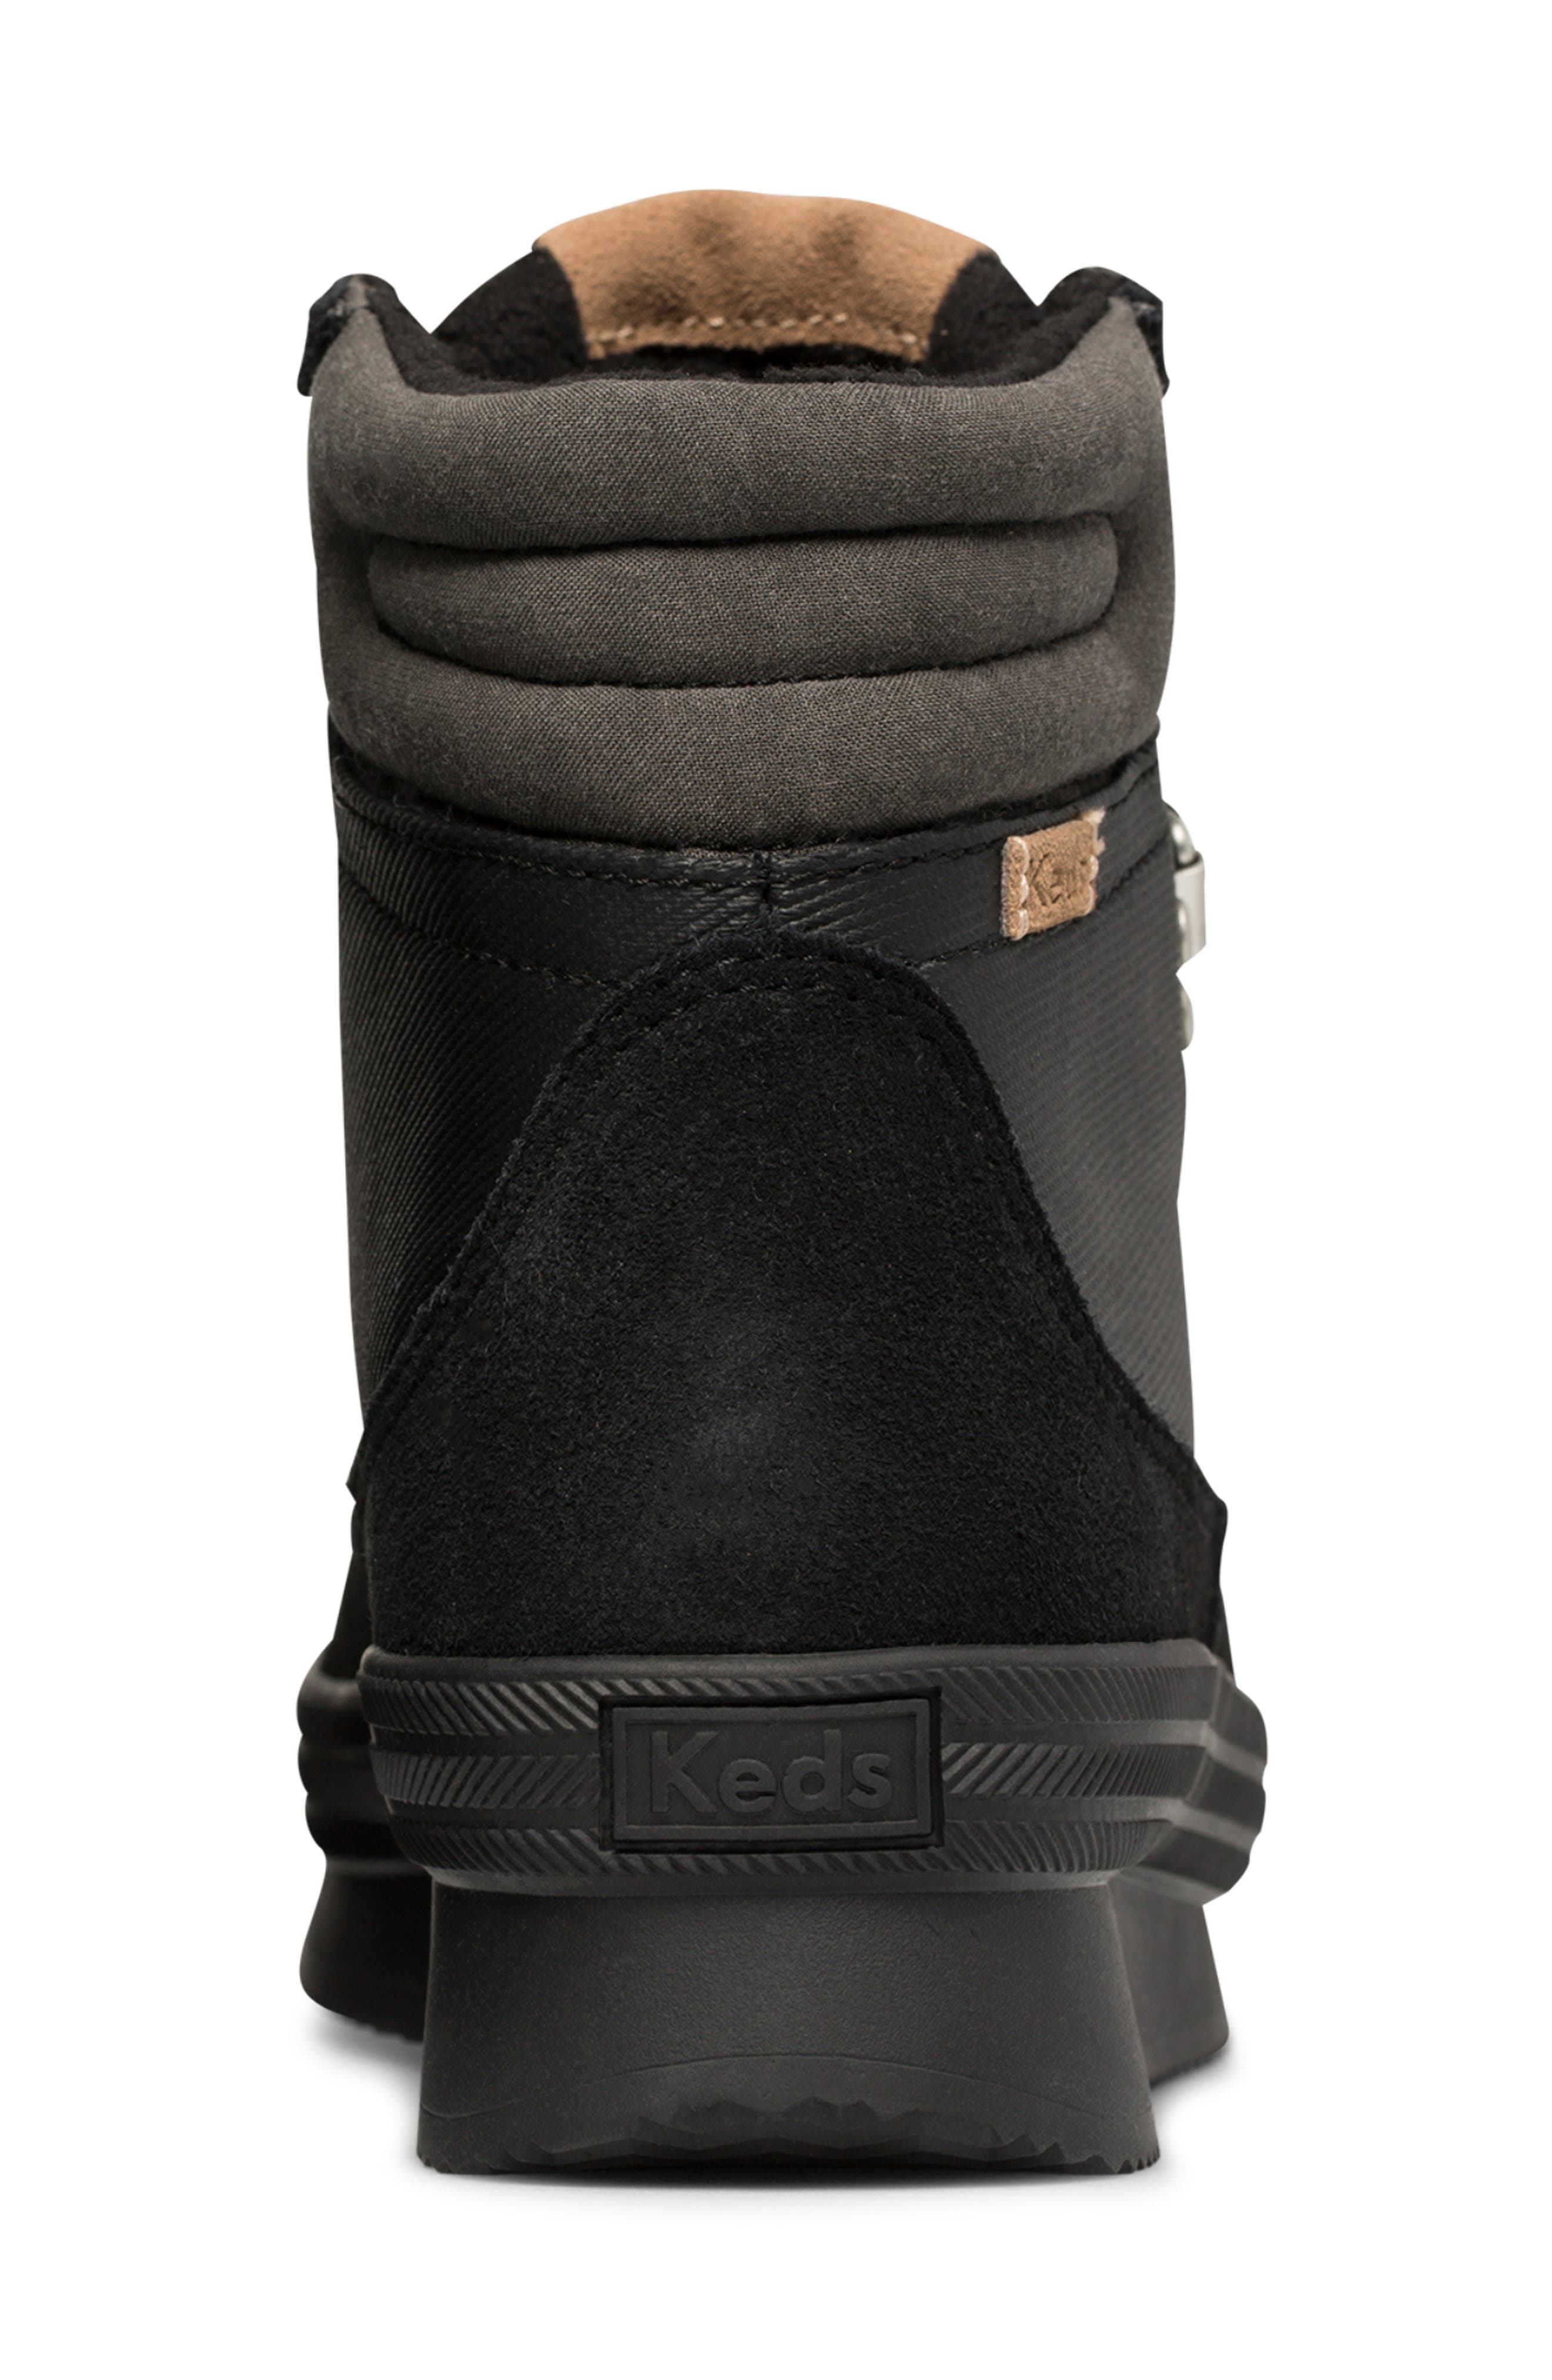 keds midland water resistant boots